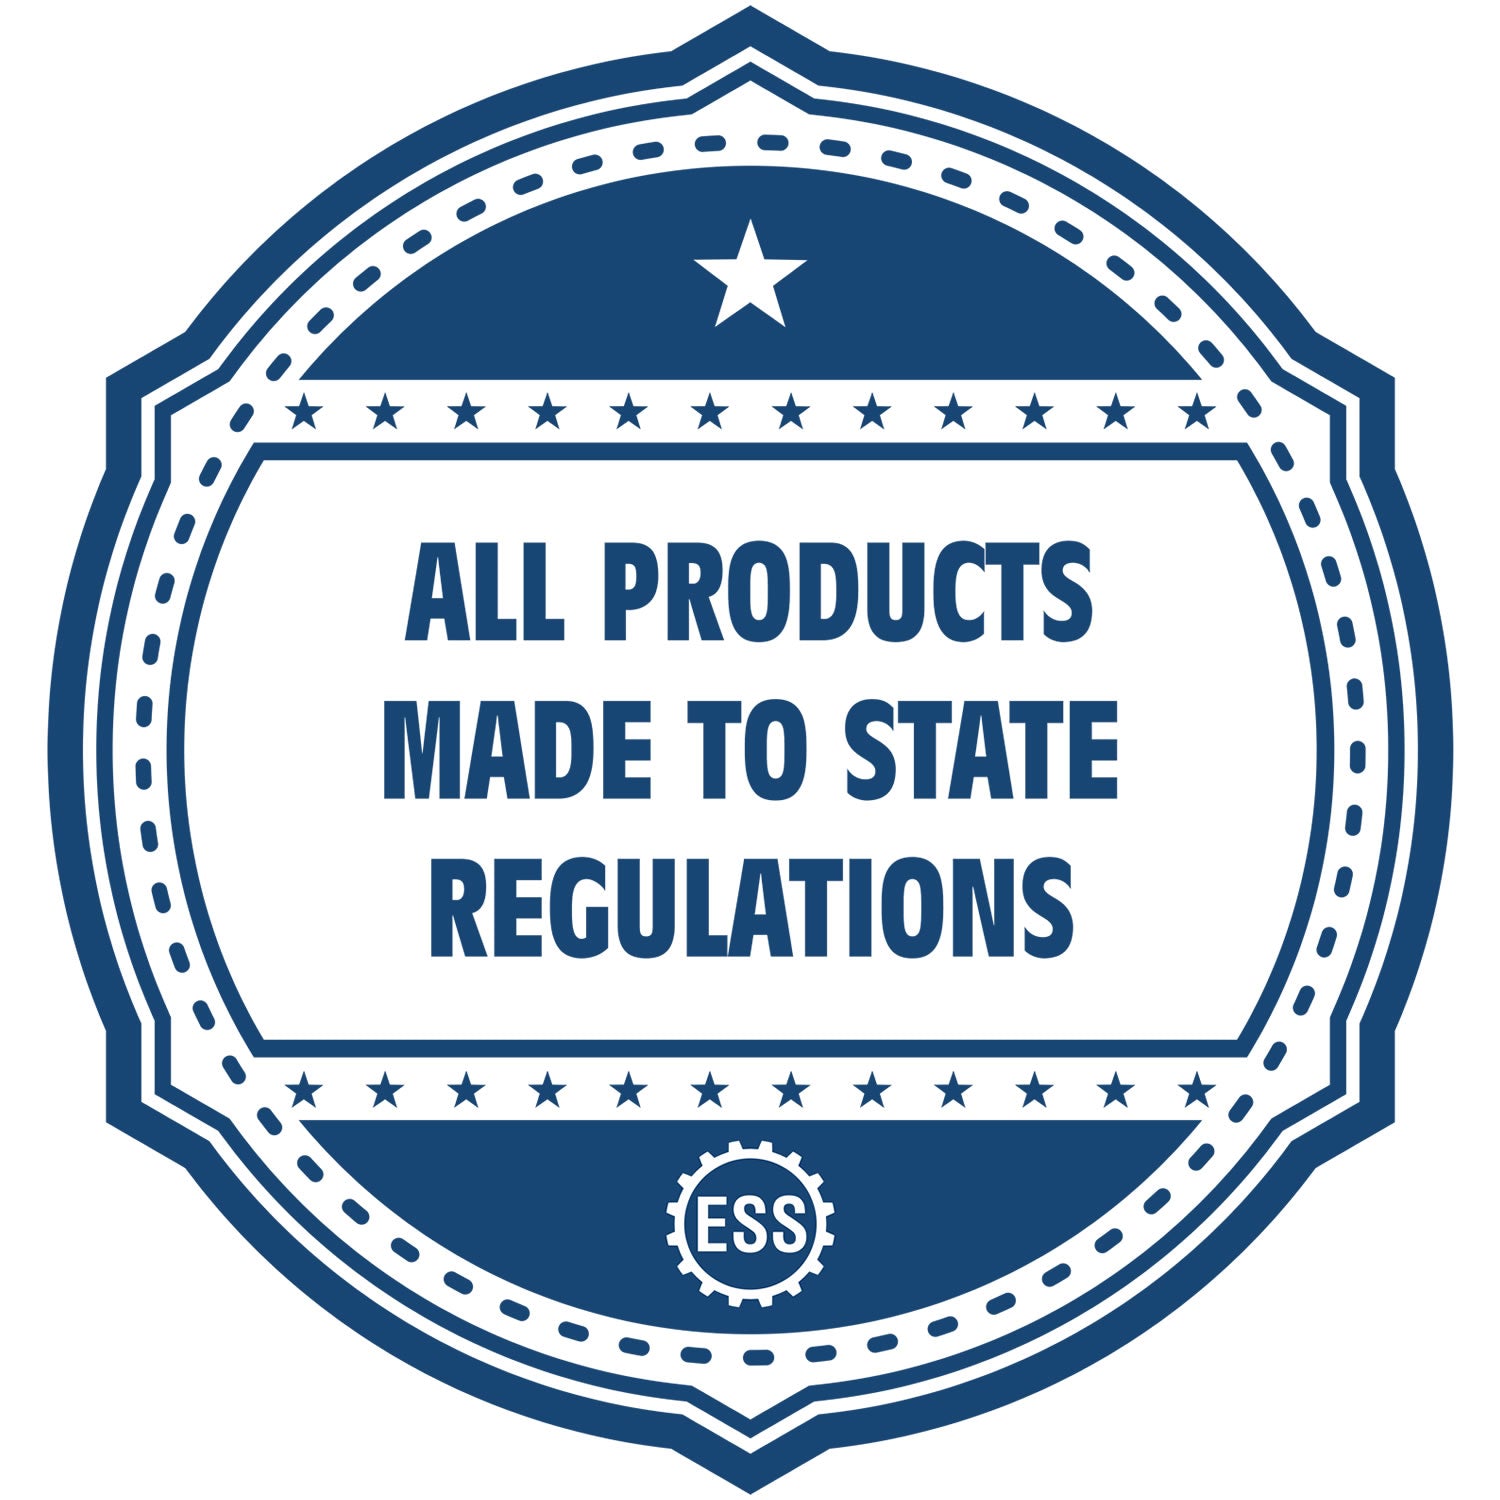 An icon or badge element for the Digital Michigan Landscape Architect Stamp showing that this product is made in compliance with state regulations.